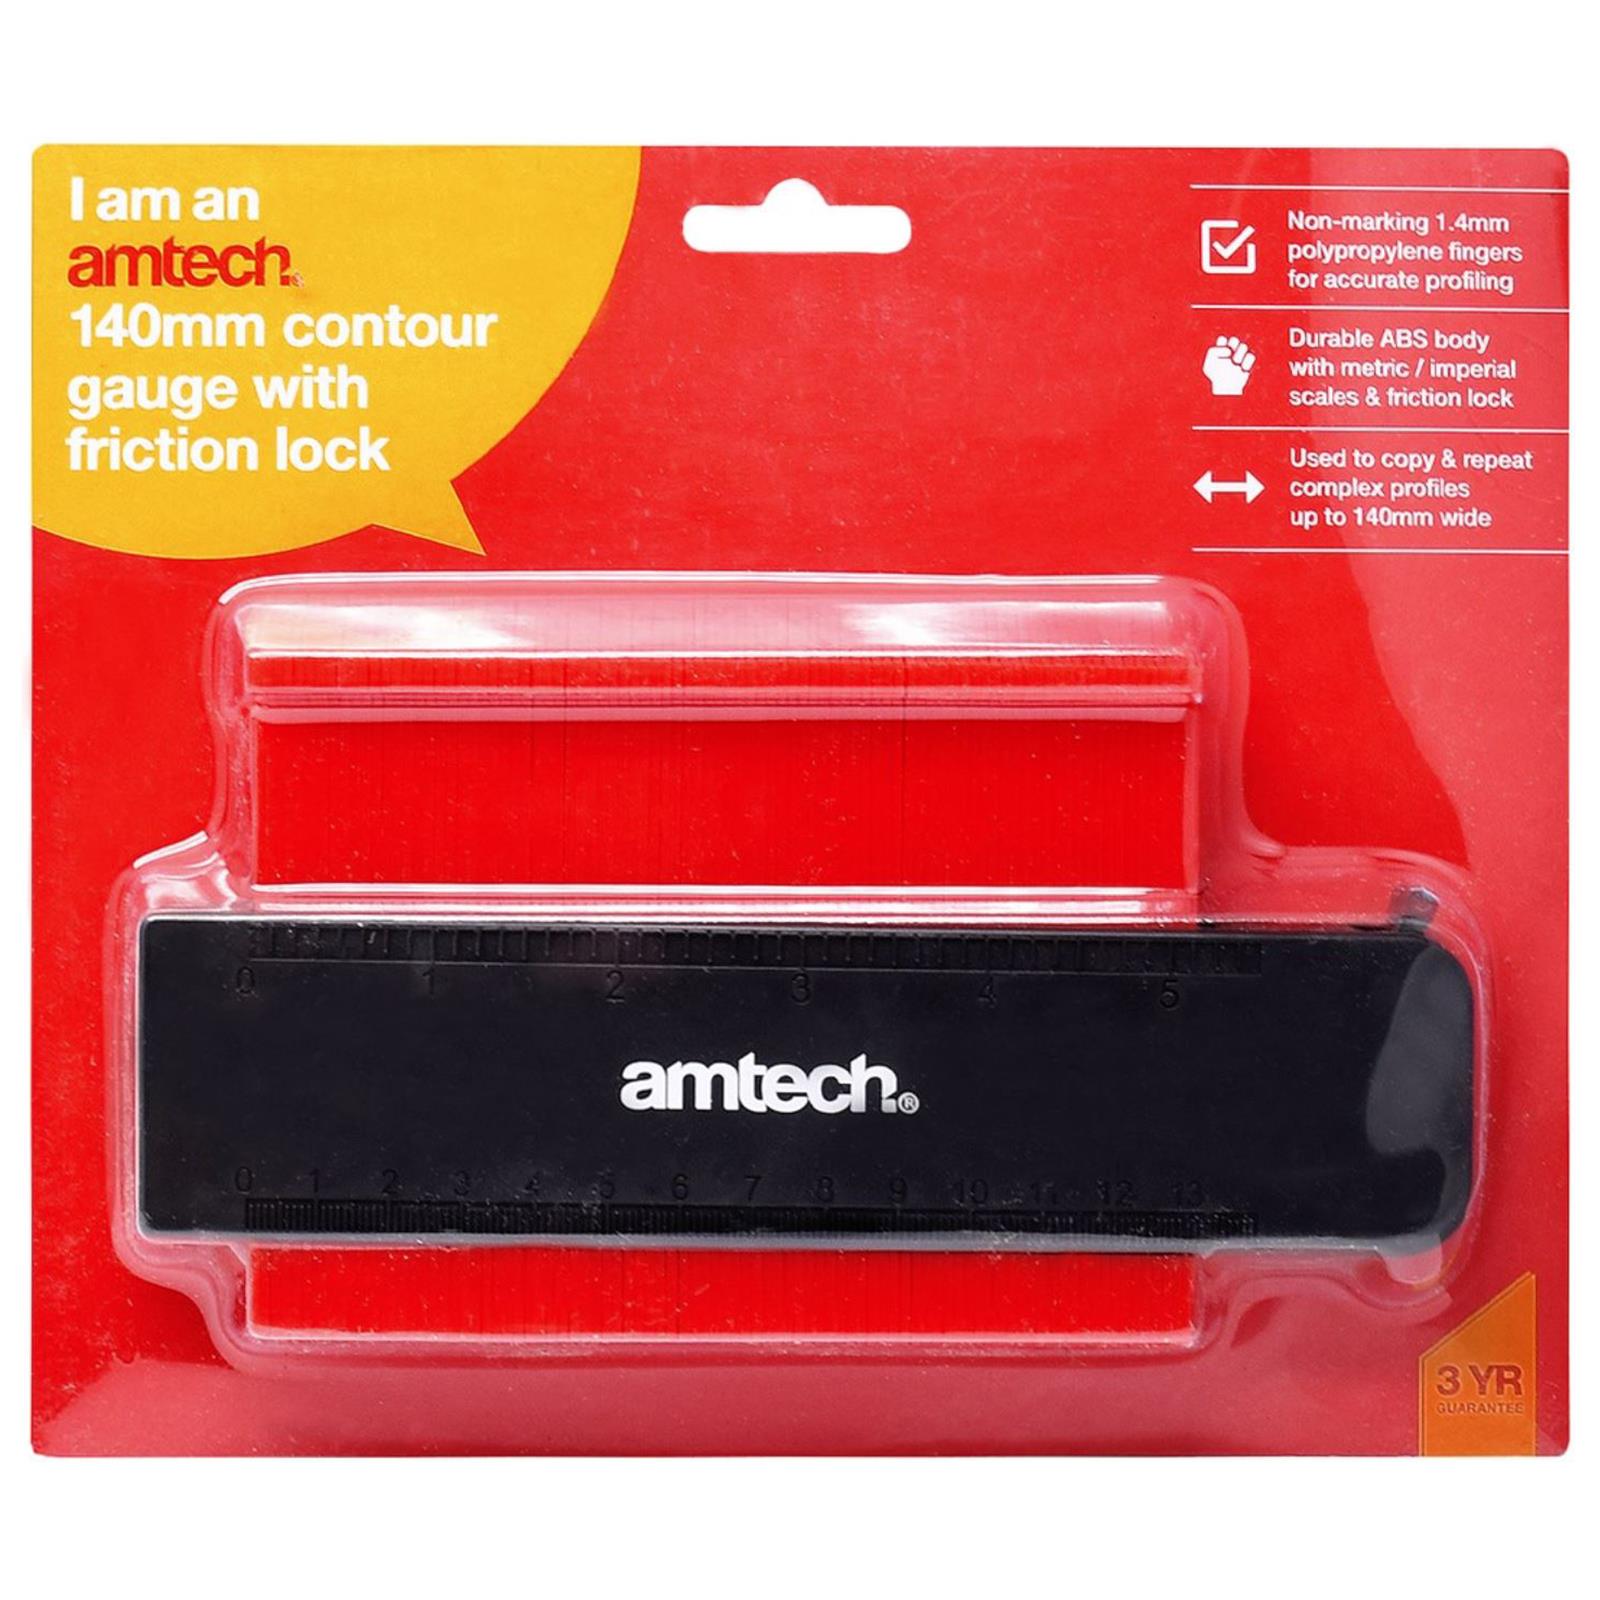 Amtech Contour Gauge With Friction Lock 140mm (5 Inch)